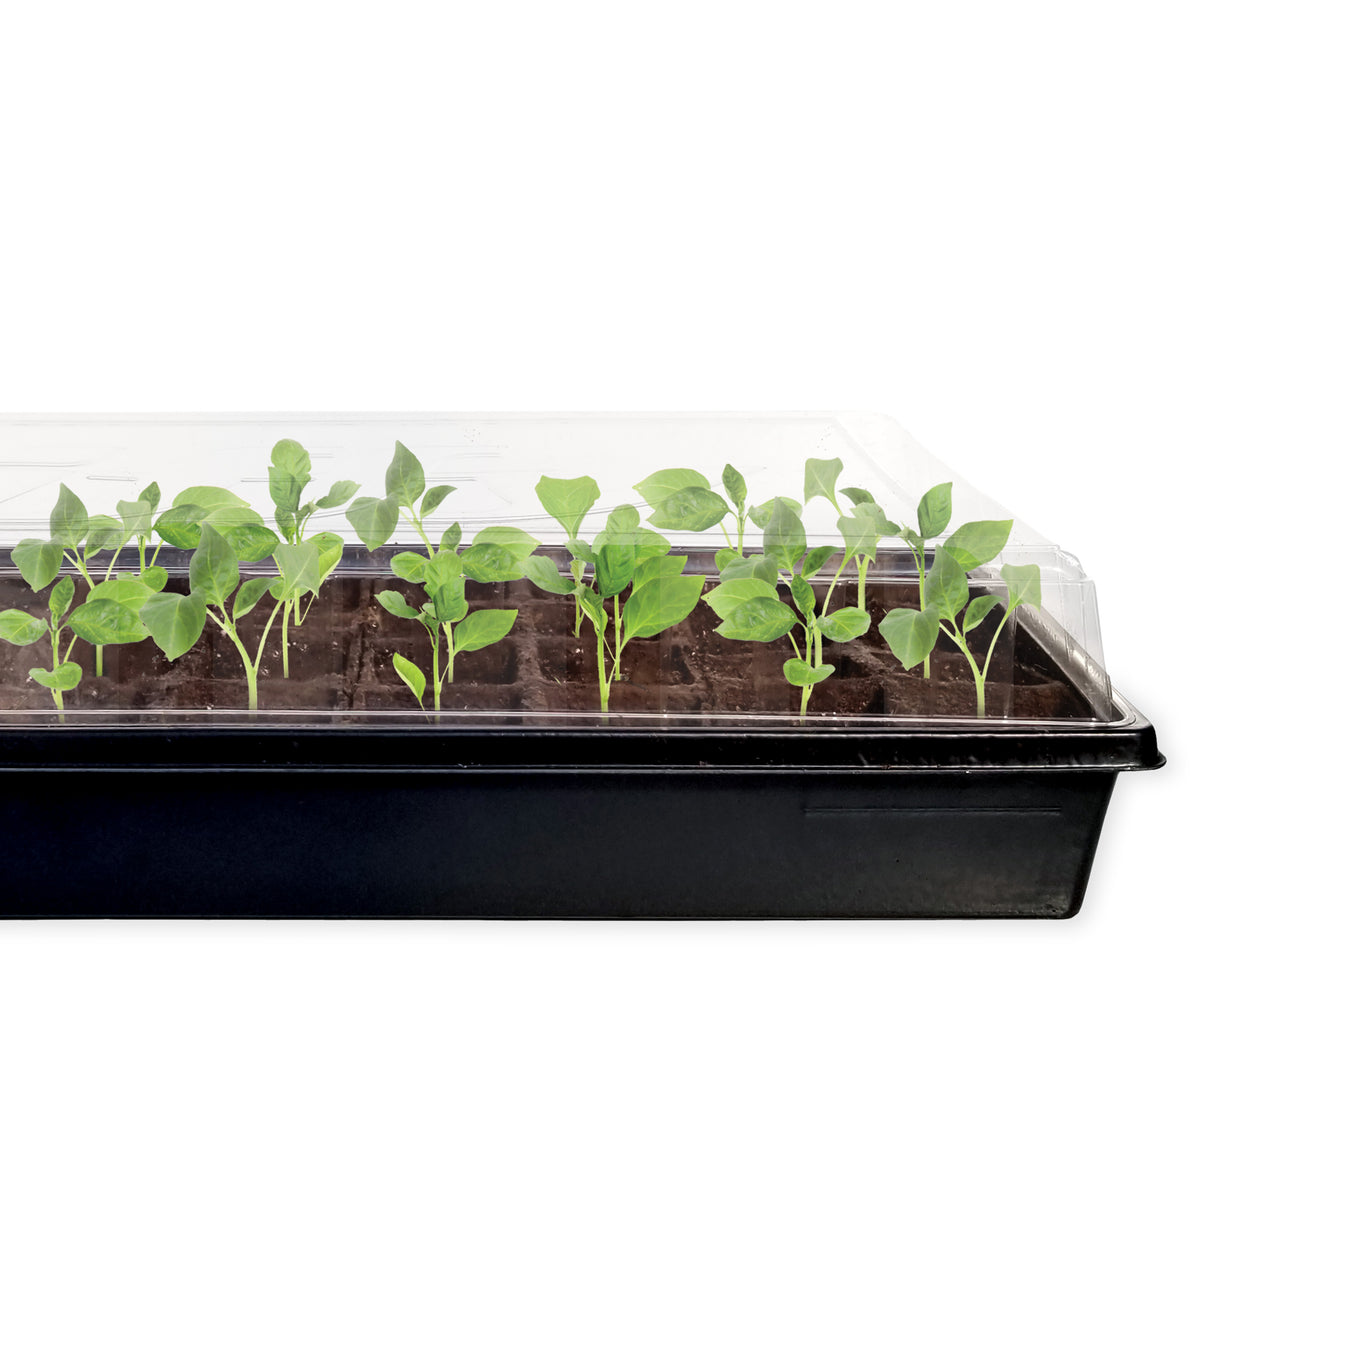 Image of seedlings growing within a Jiffy peat strip tray with the humidity dome in place.